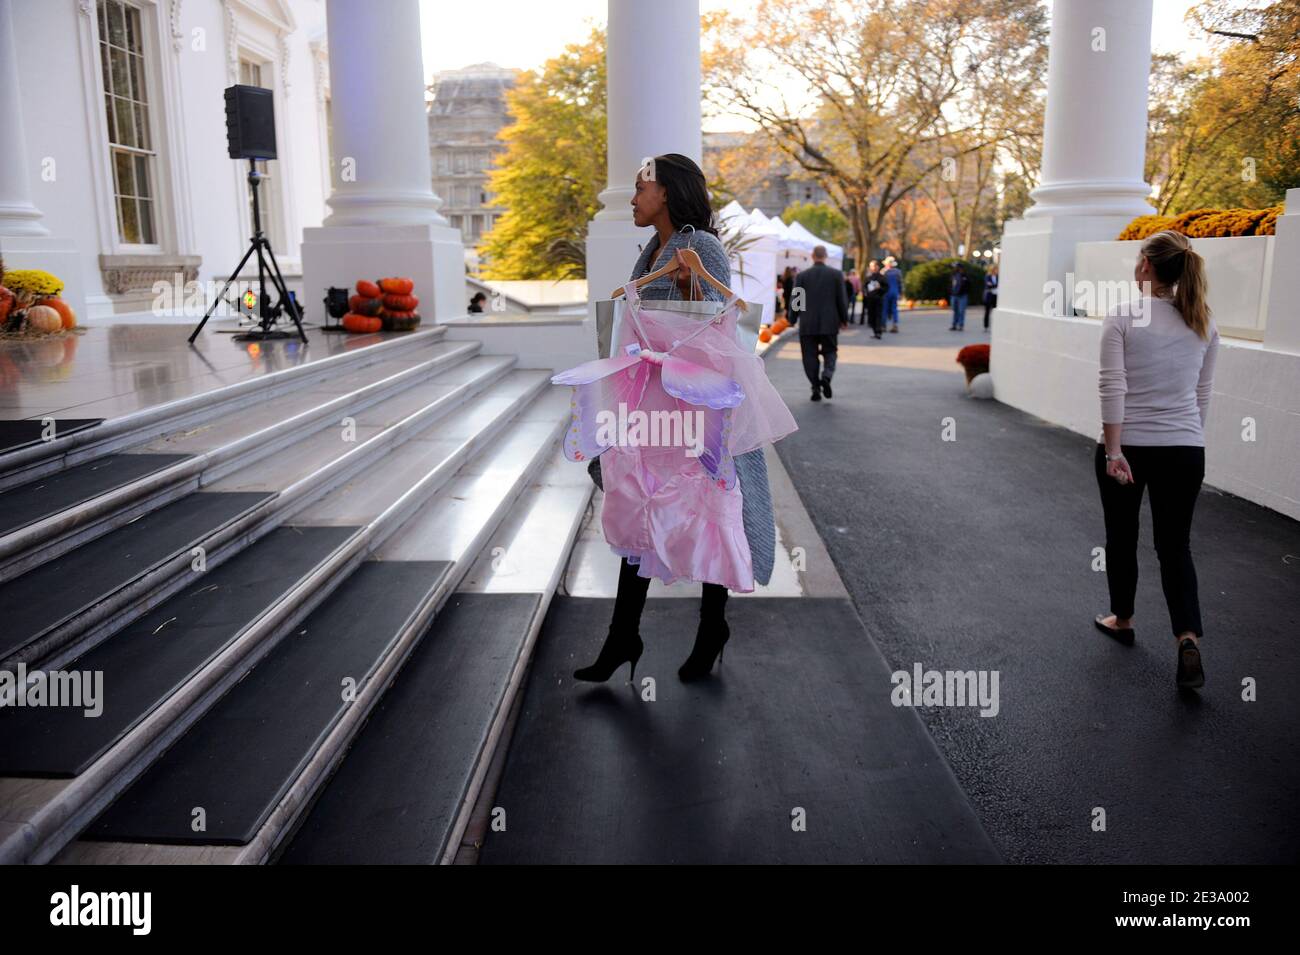 The White House is decorated for Halloween at the North Portico of the White House in Washington, DC, USA on October 31, 2010. US President Barack Obama and First Lady Michelle Obama will greet trick or treaters at the North Portico of the White House to celebrate Halloween. Photo by Olivier Douliery/ABACAPRESS.COM Stock Photo